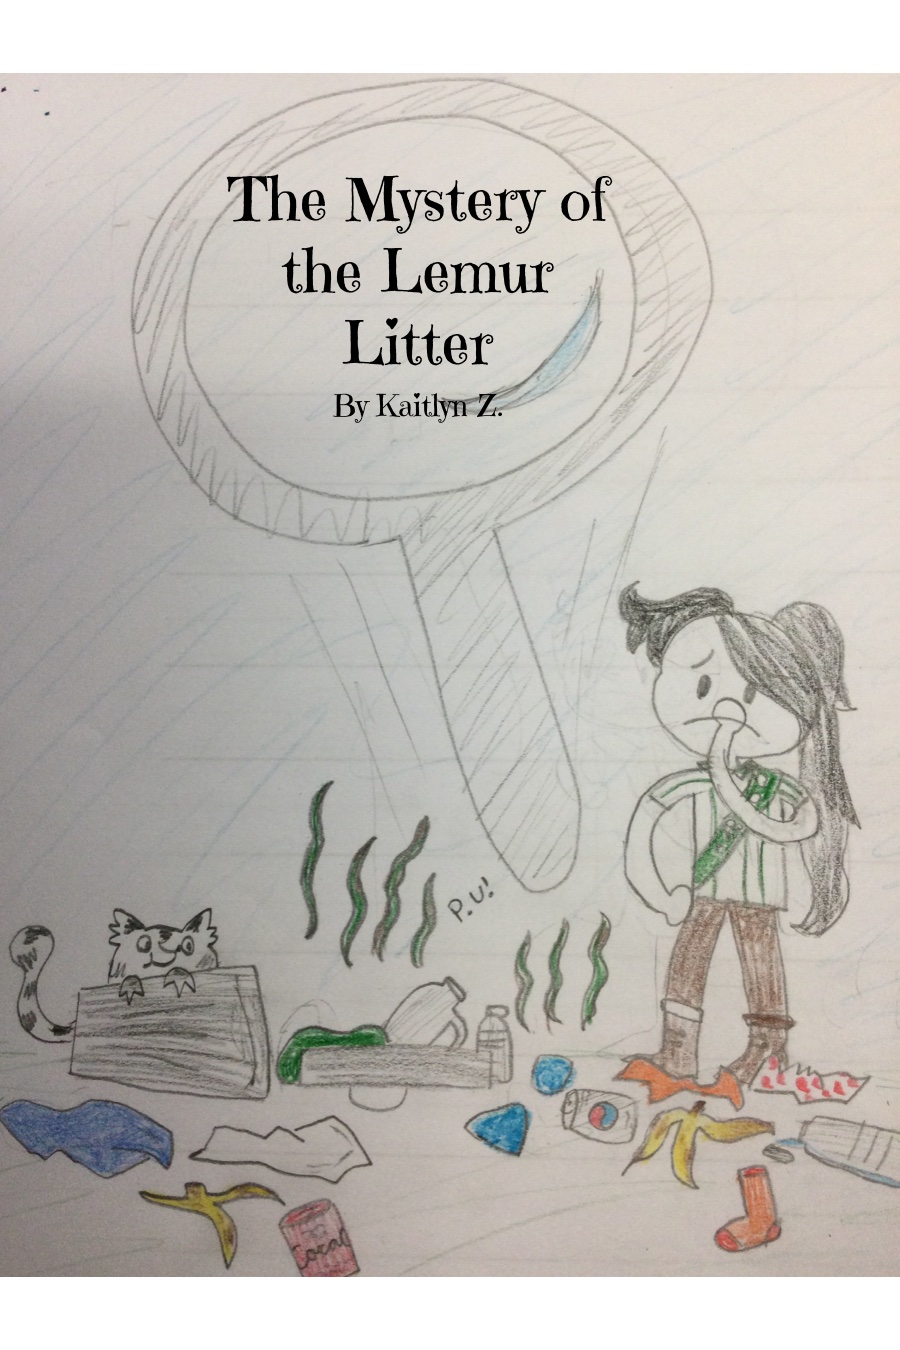 The Mystery of the Lemur Litter by Kaitlyn Z